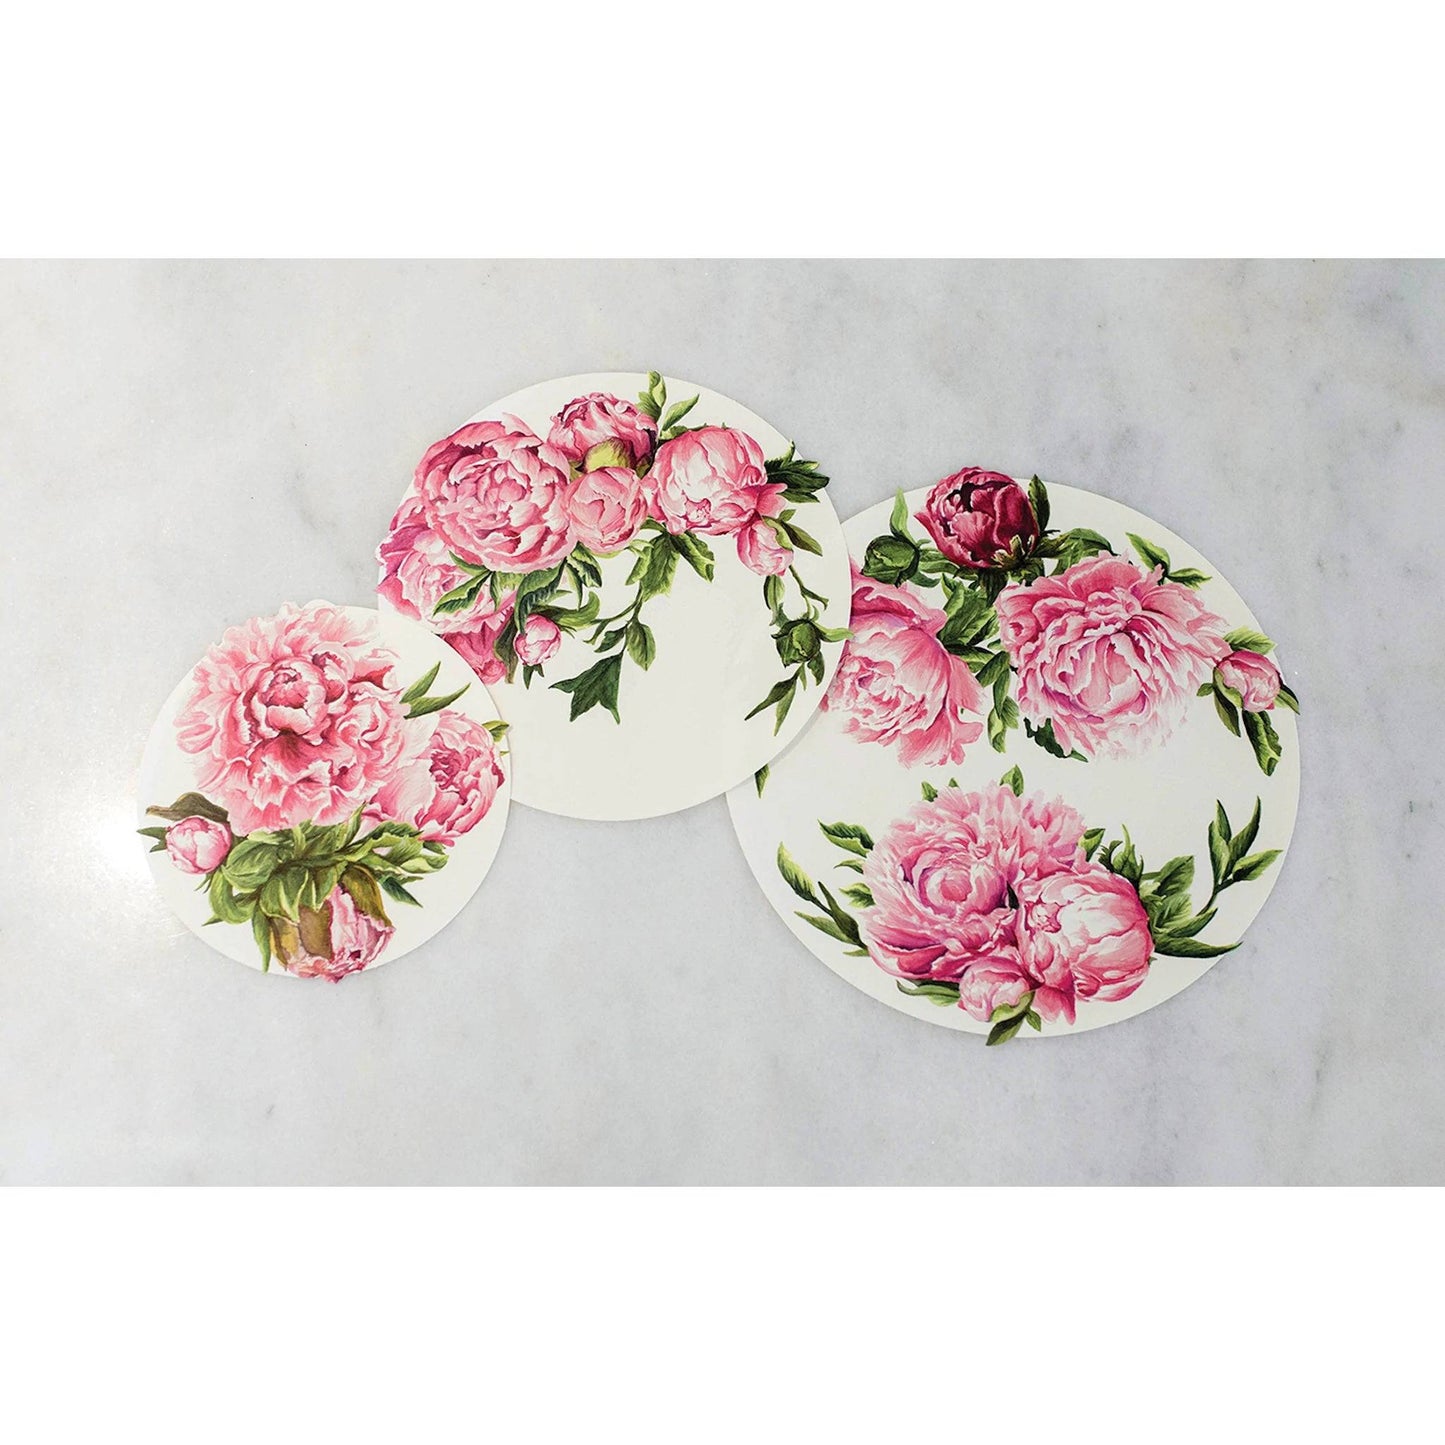 HESTER & COOK - Peony Serving Papers - Findlay Rowe Designs